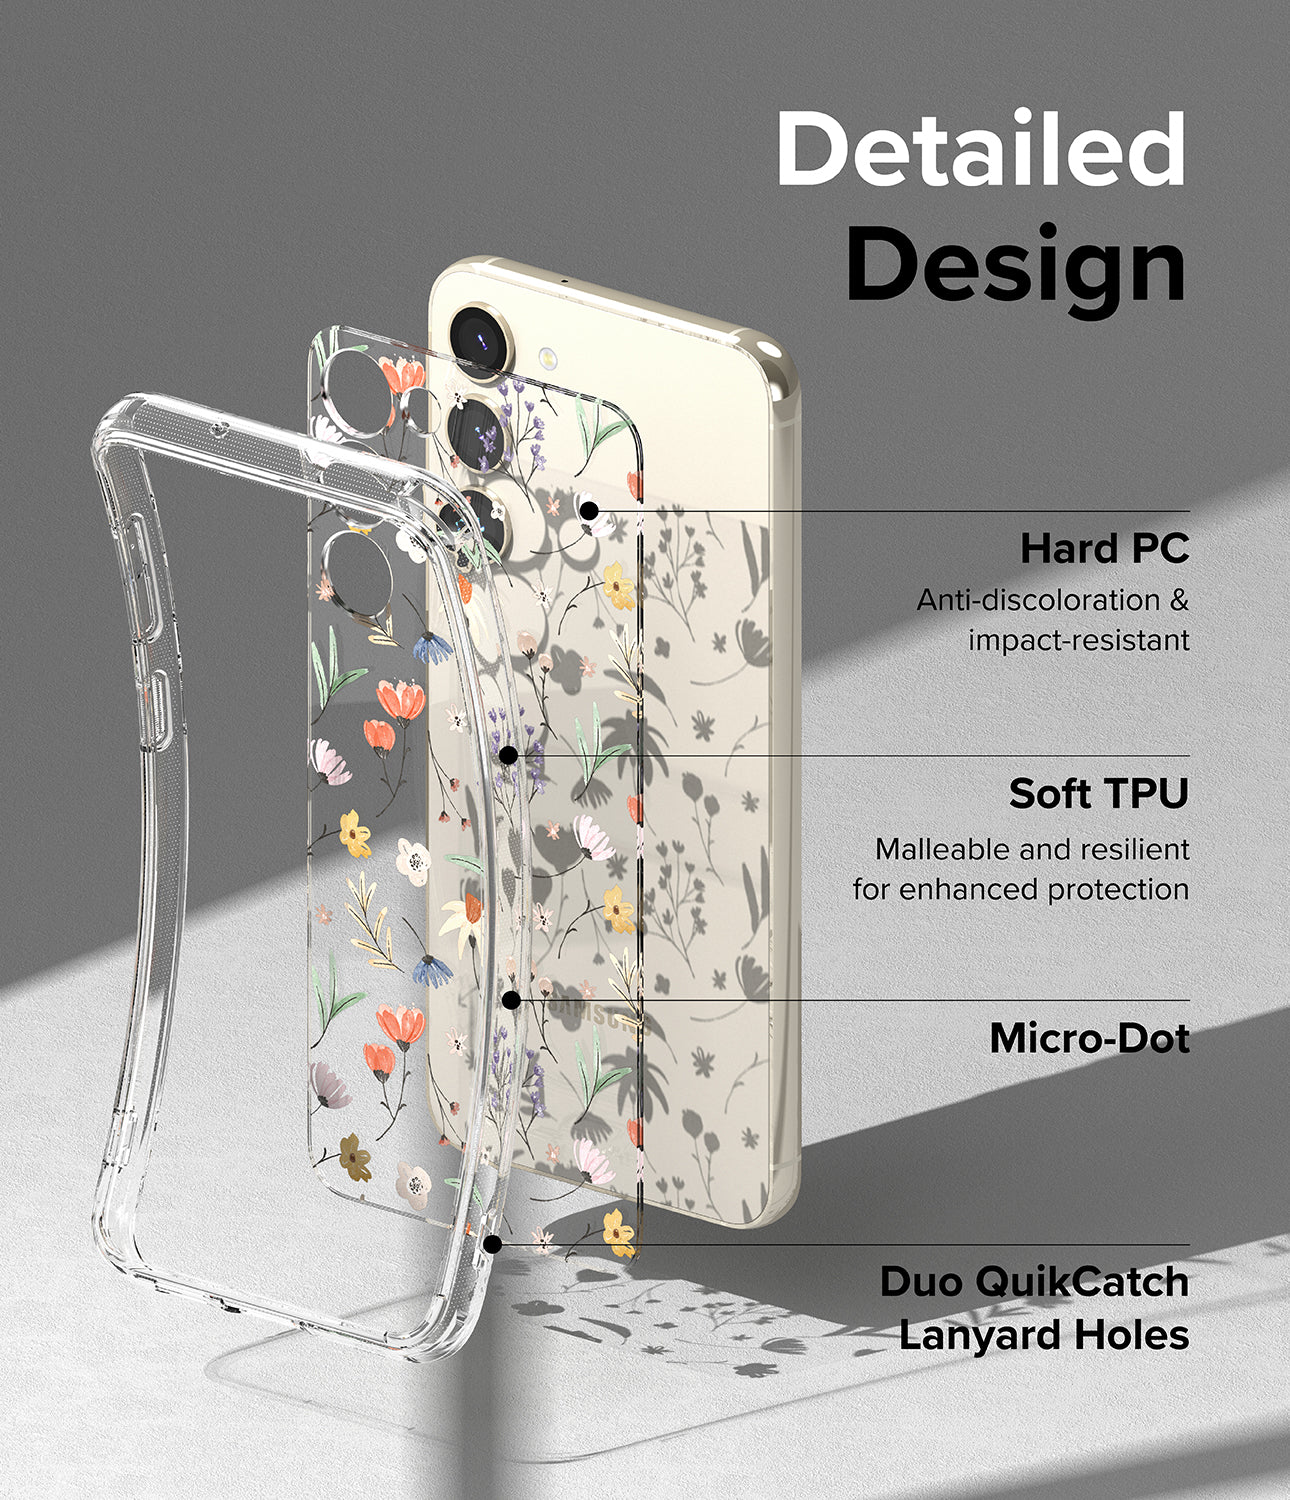 Galaxy S23 Plus Case | Fusion Design Dry Flowers - Detailed Design. Anti-discoloration with Hard PC. Malleable and resilient for enhanced protection with Soft TPU. Micro-Dot. Duo QuikCatch Lanyard Holes.